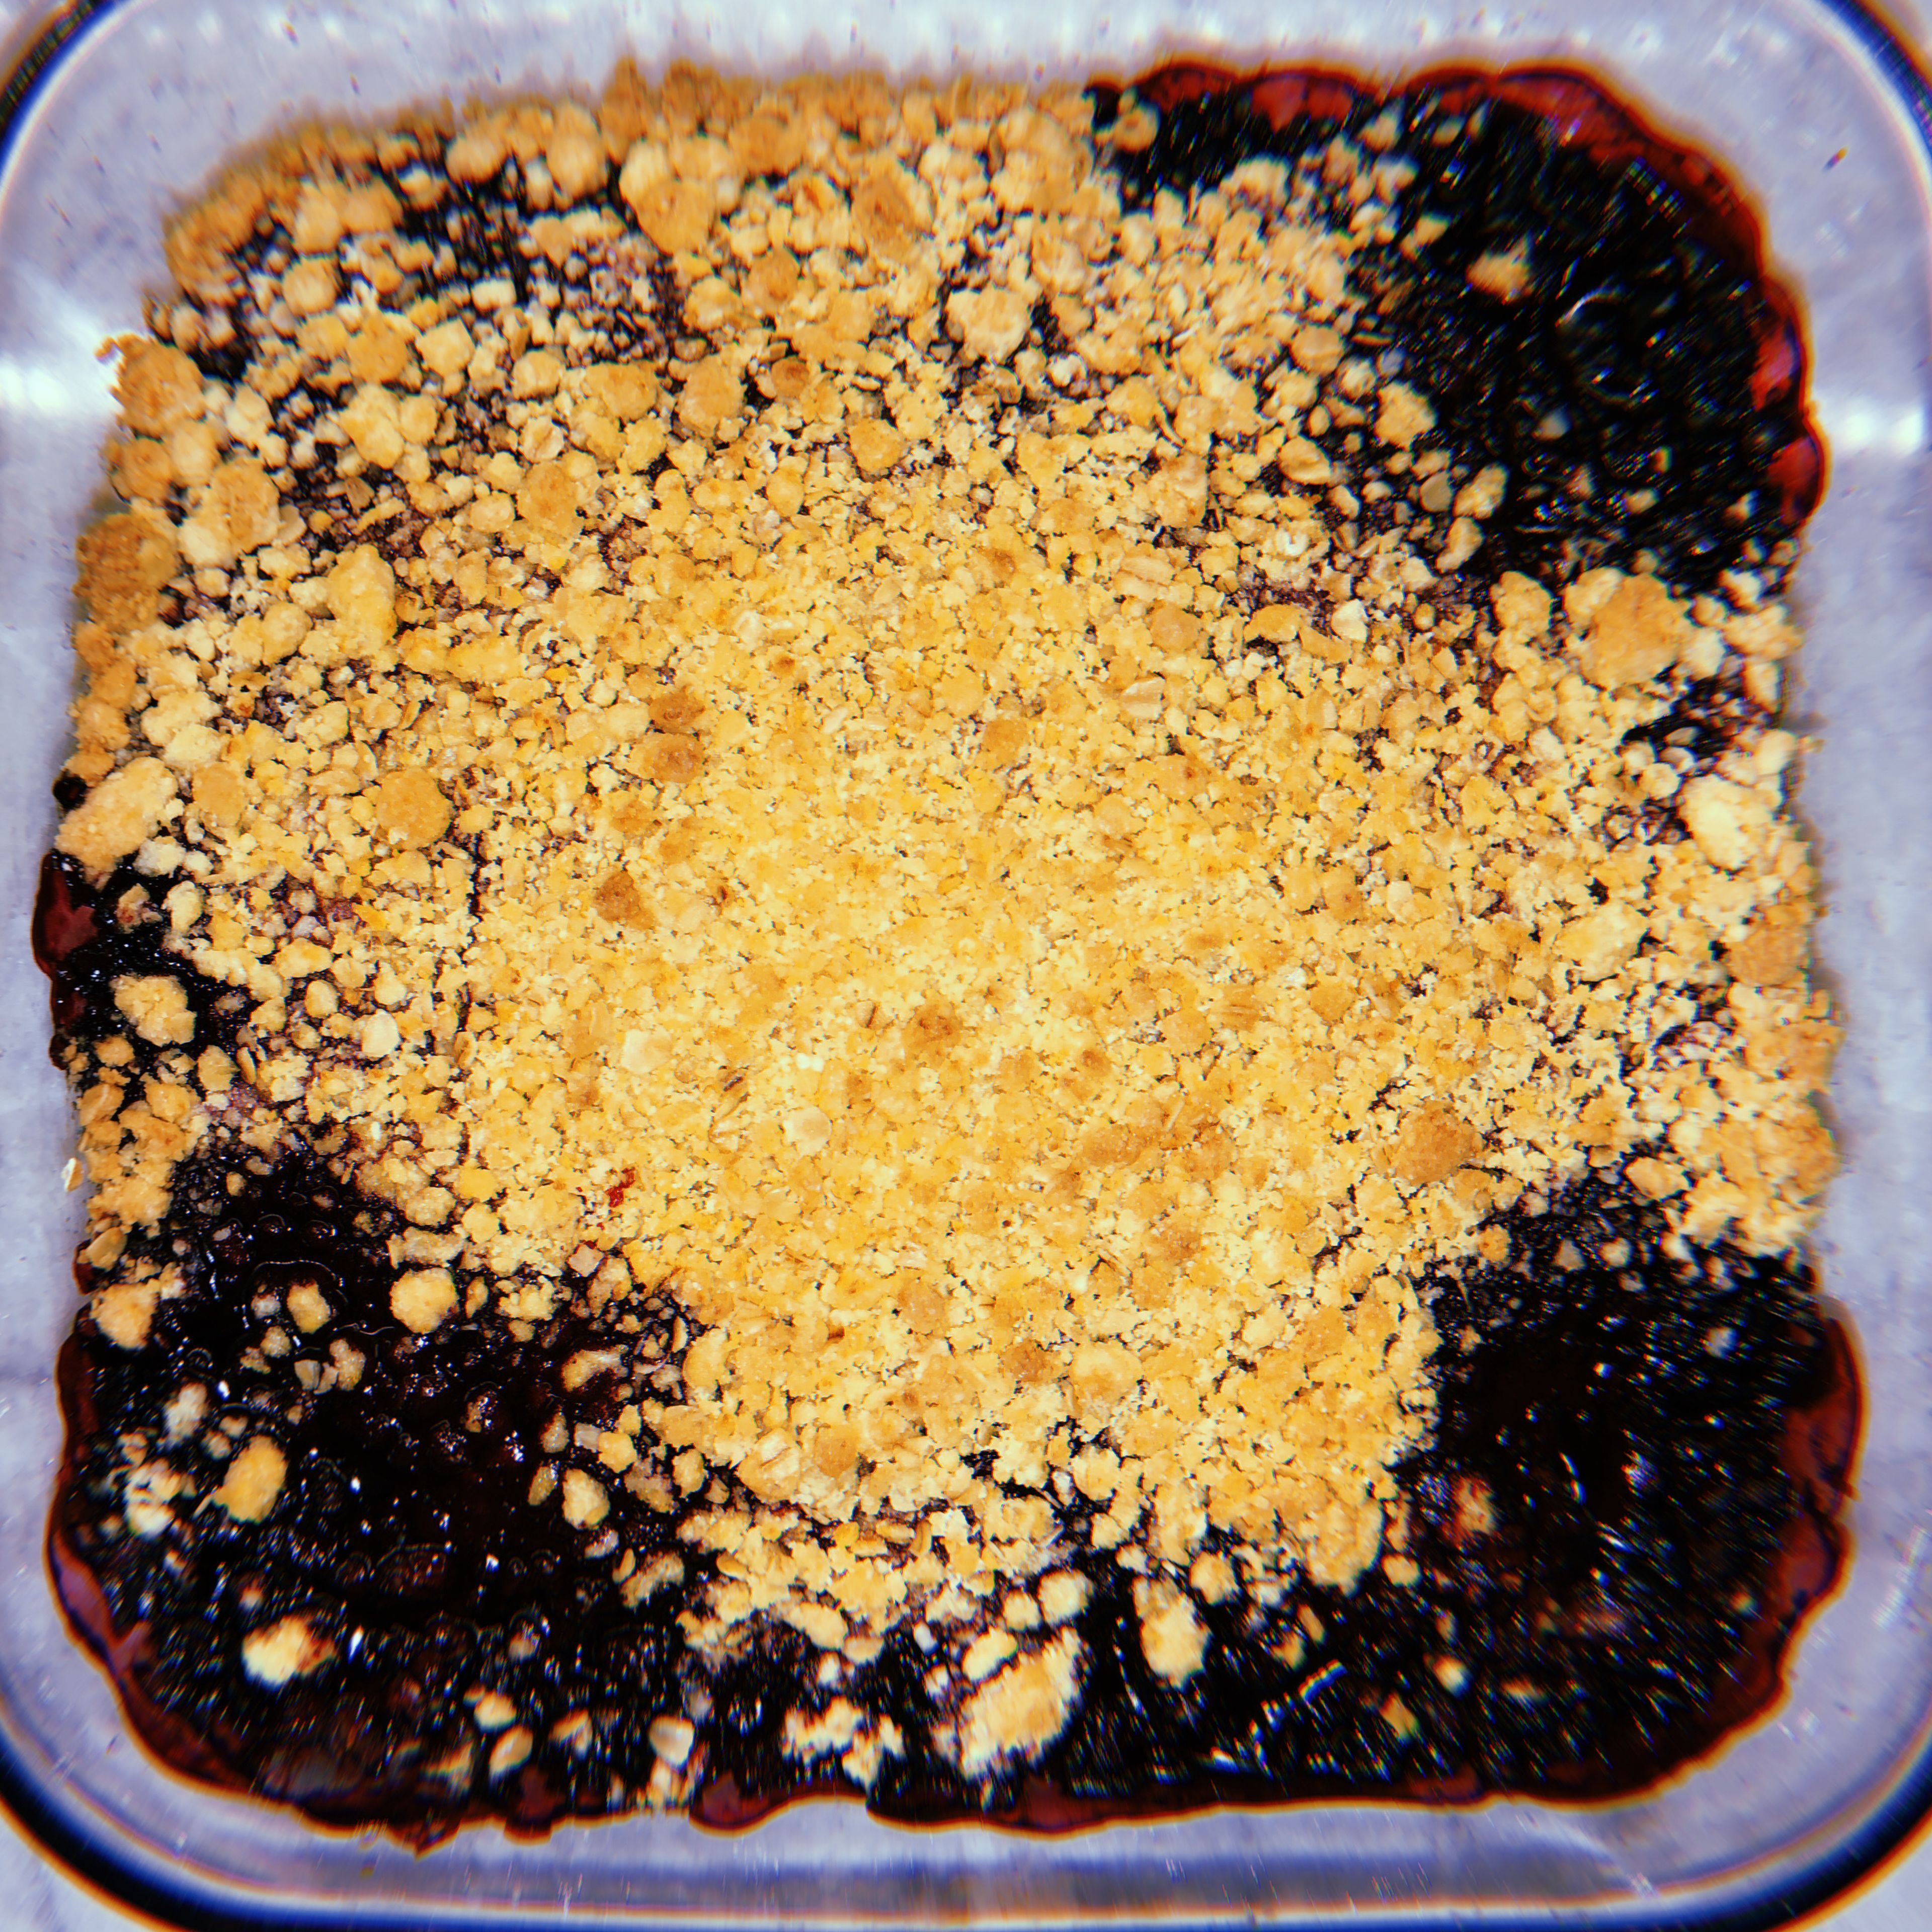 A mix of two crumble recipes